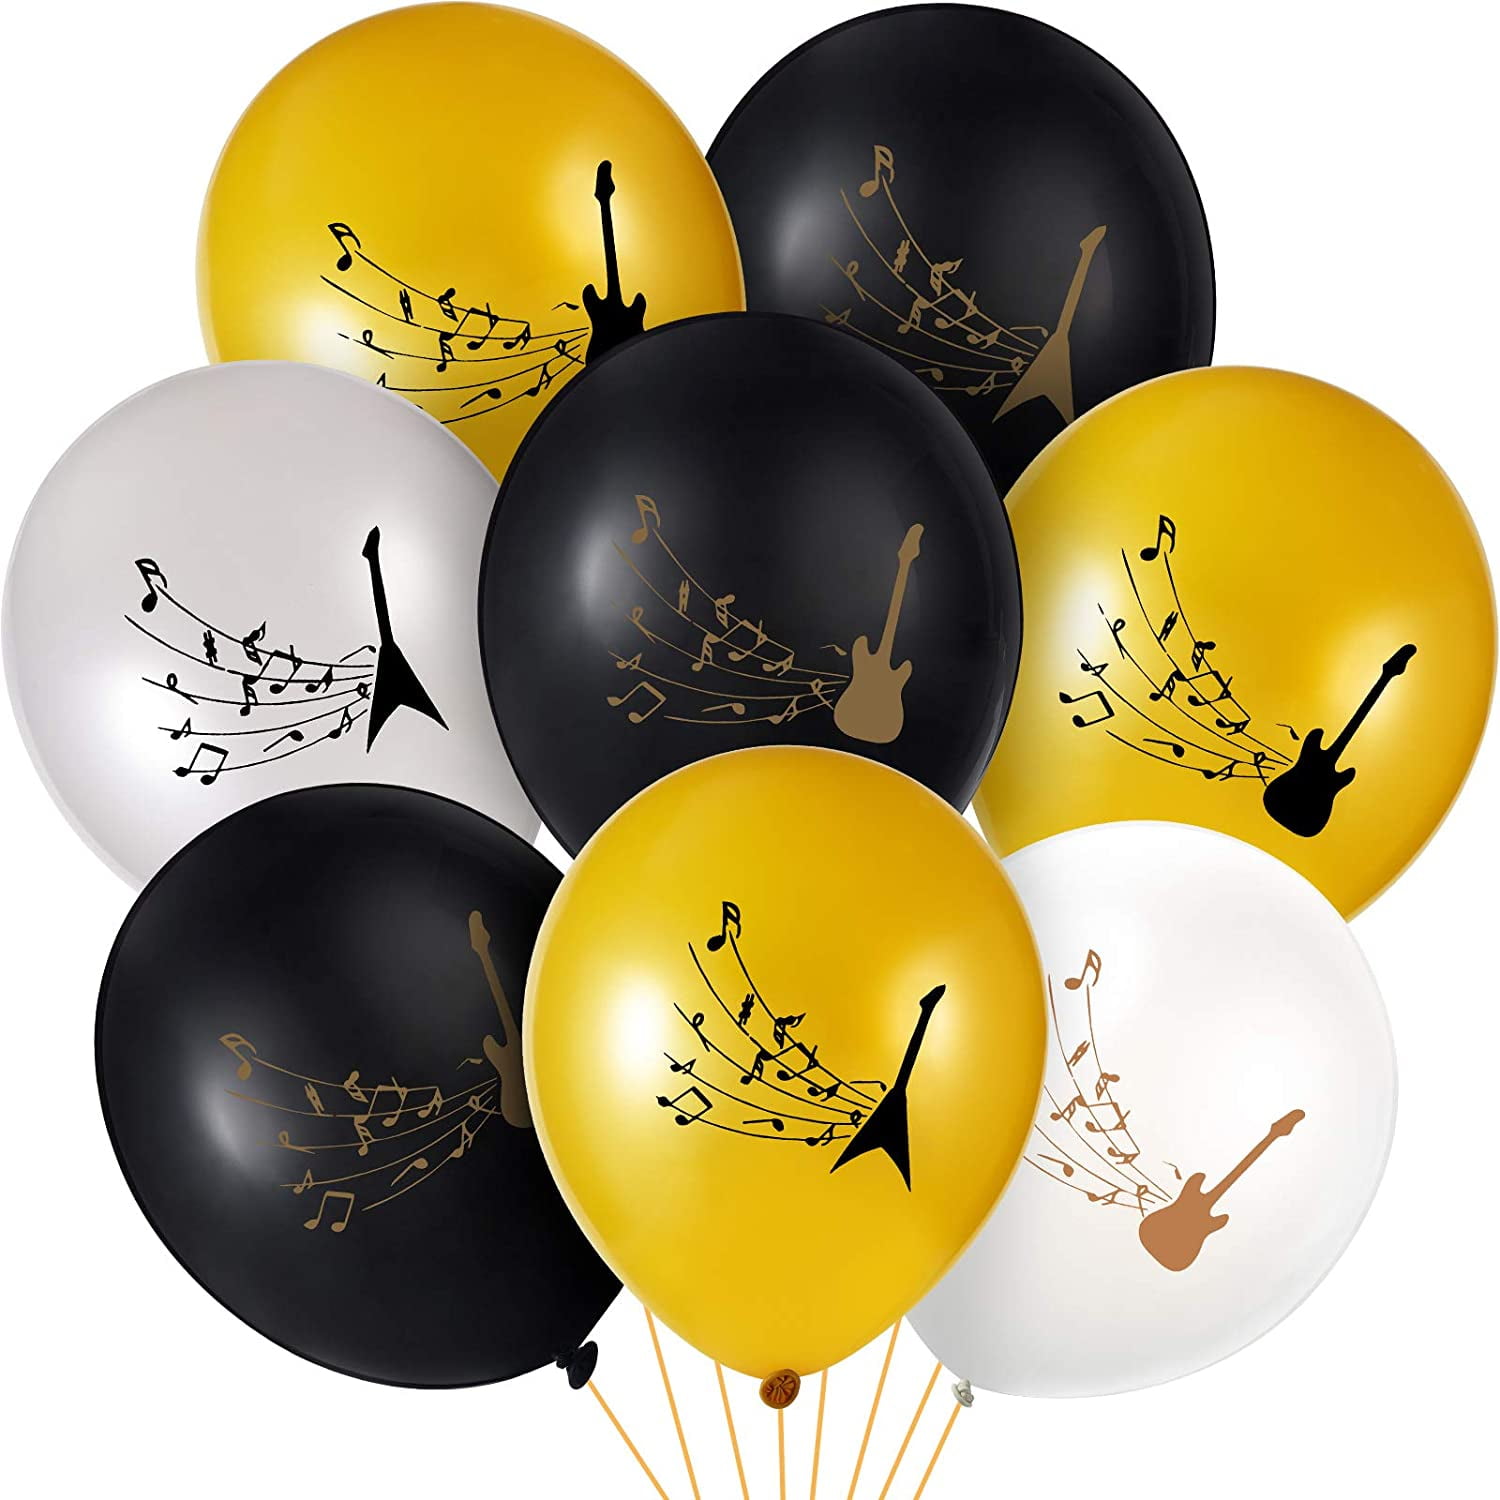 Details about   LARGE 10" Helium High Quality LATEX Balloons ANY Party Birthday Wedding balloons 